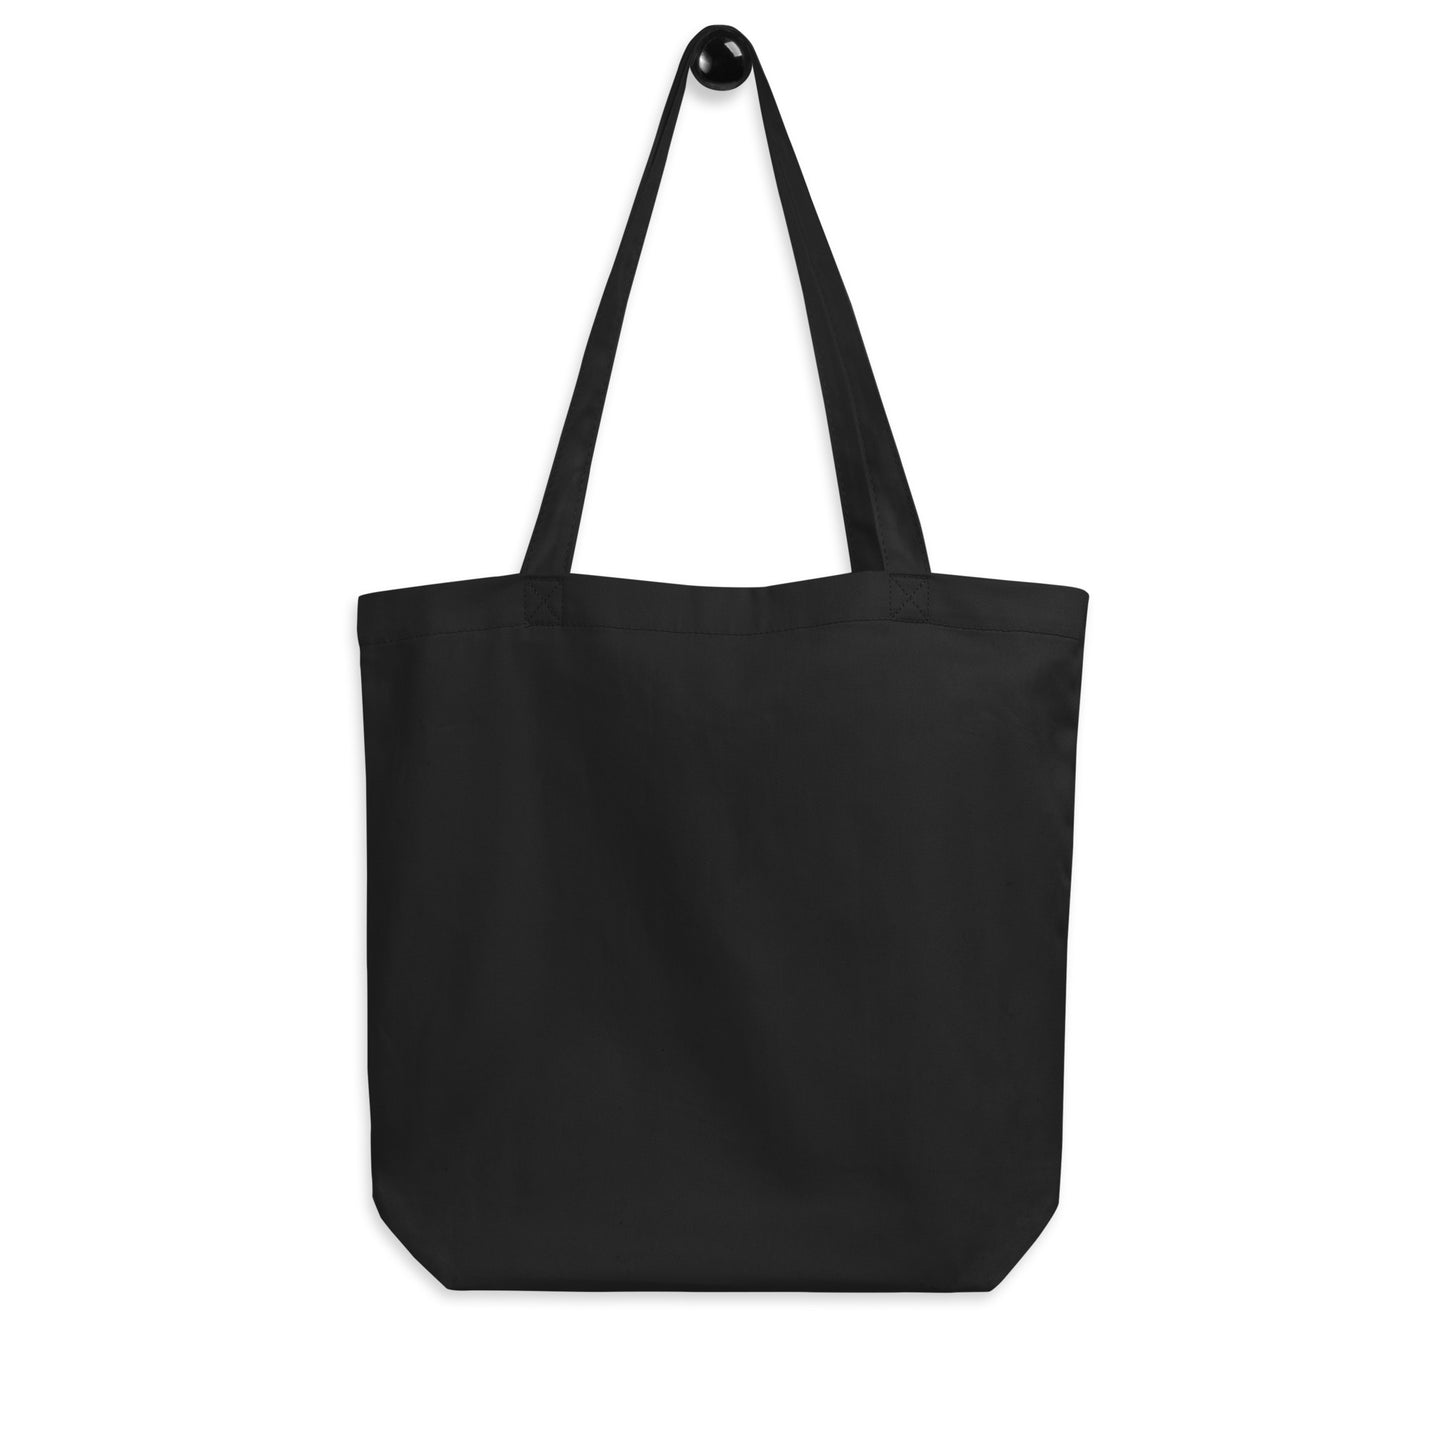 Unique Travel Gift Organic Tote - White Oval • DTW Detroit • YHM Designs - Image 05